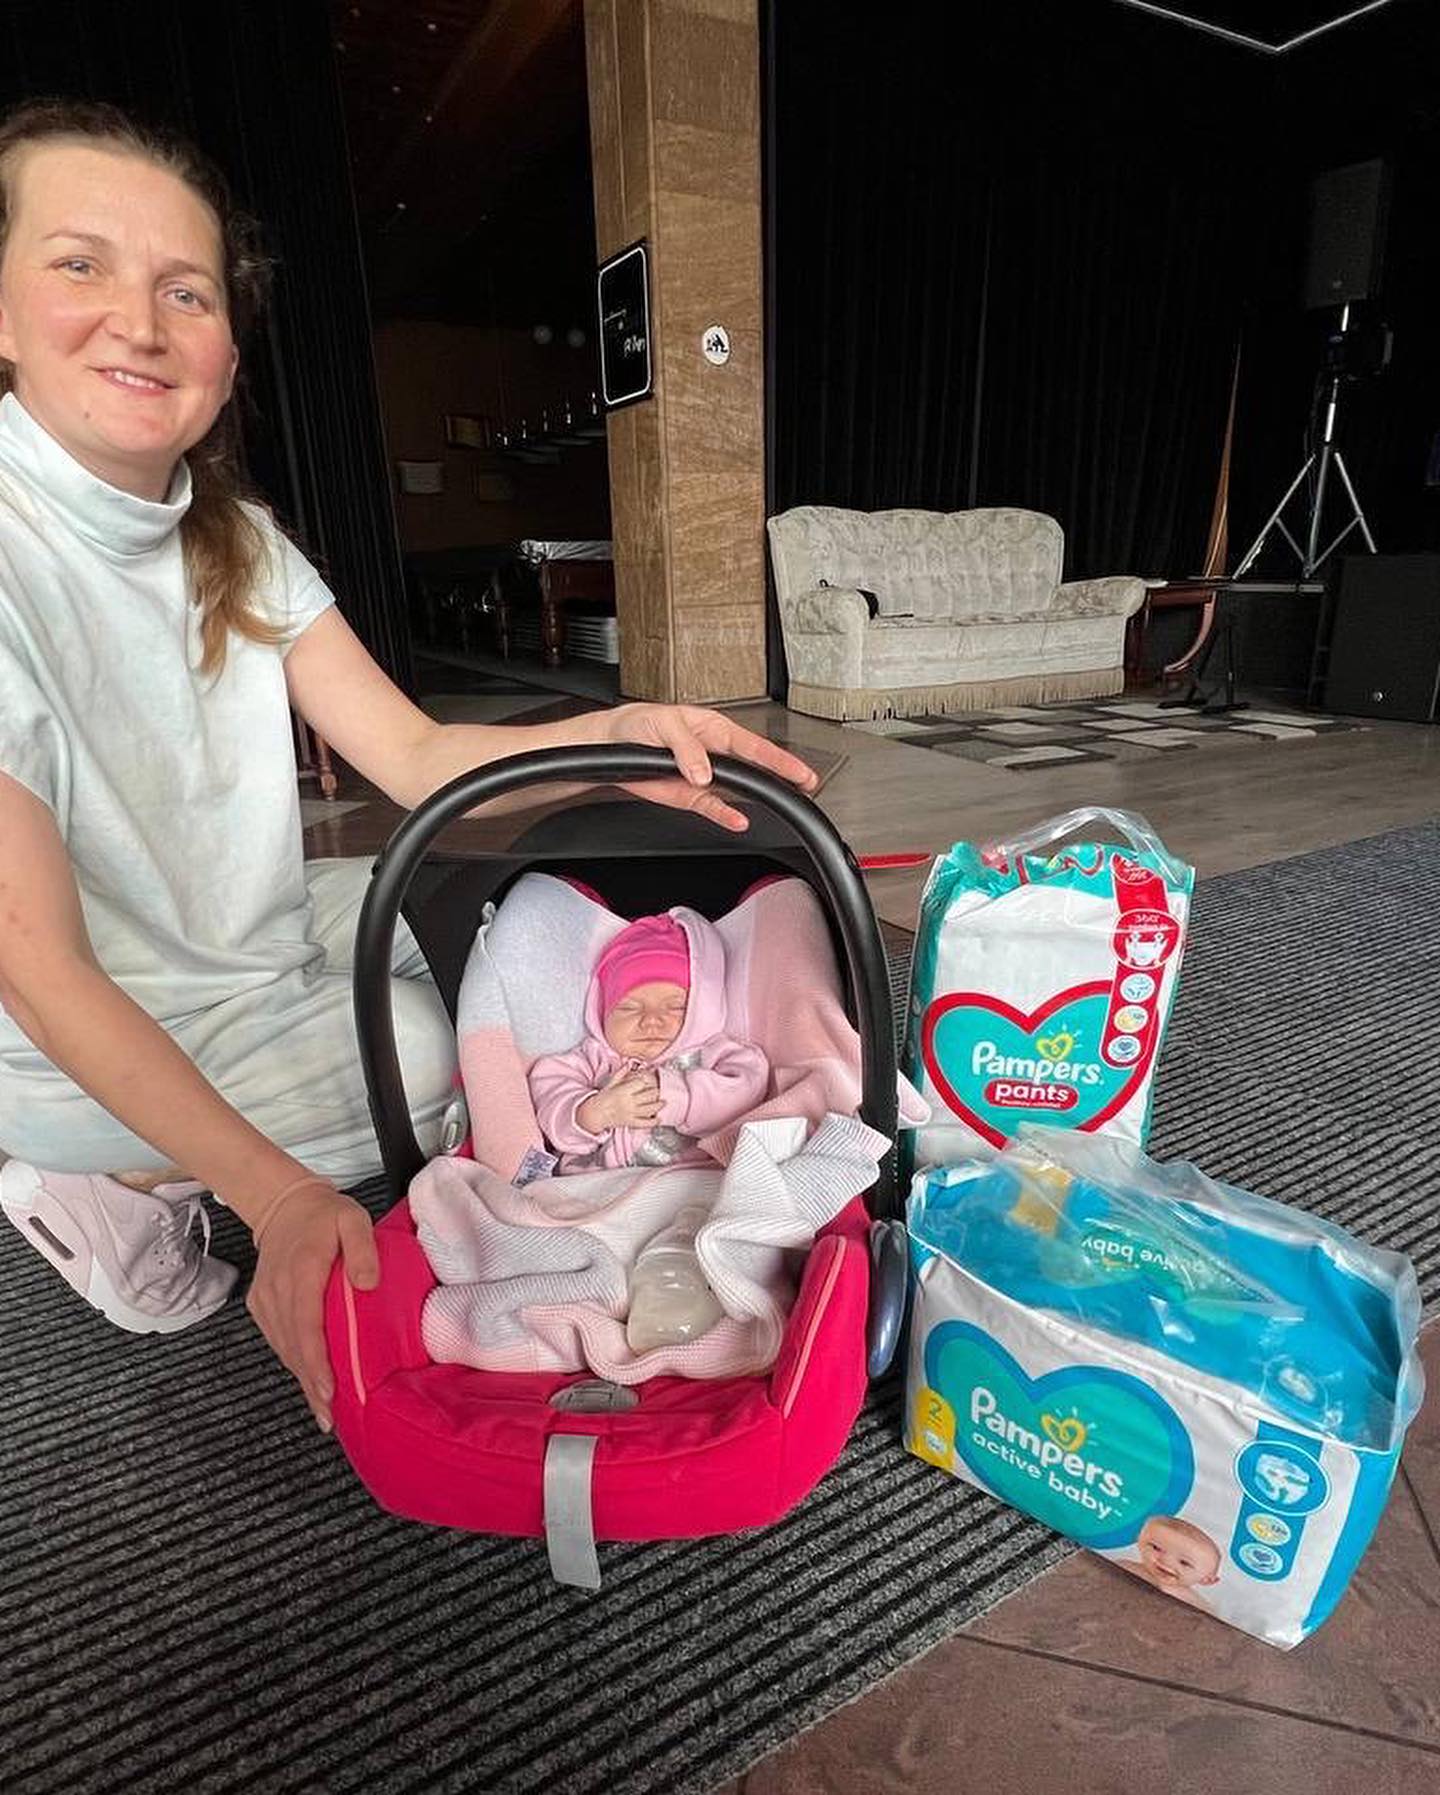 A woman is posing next to a baby car seat and diapers.